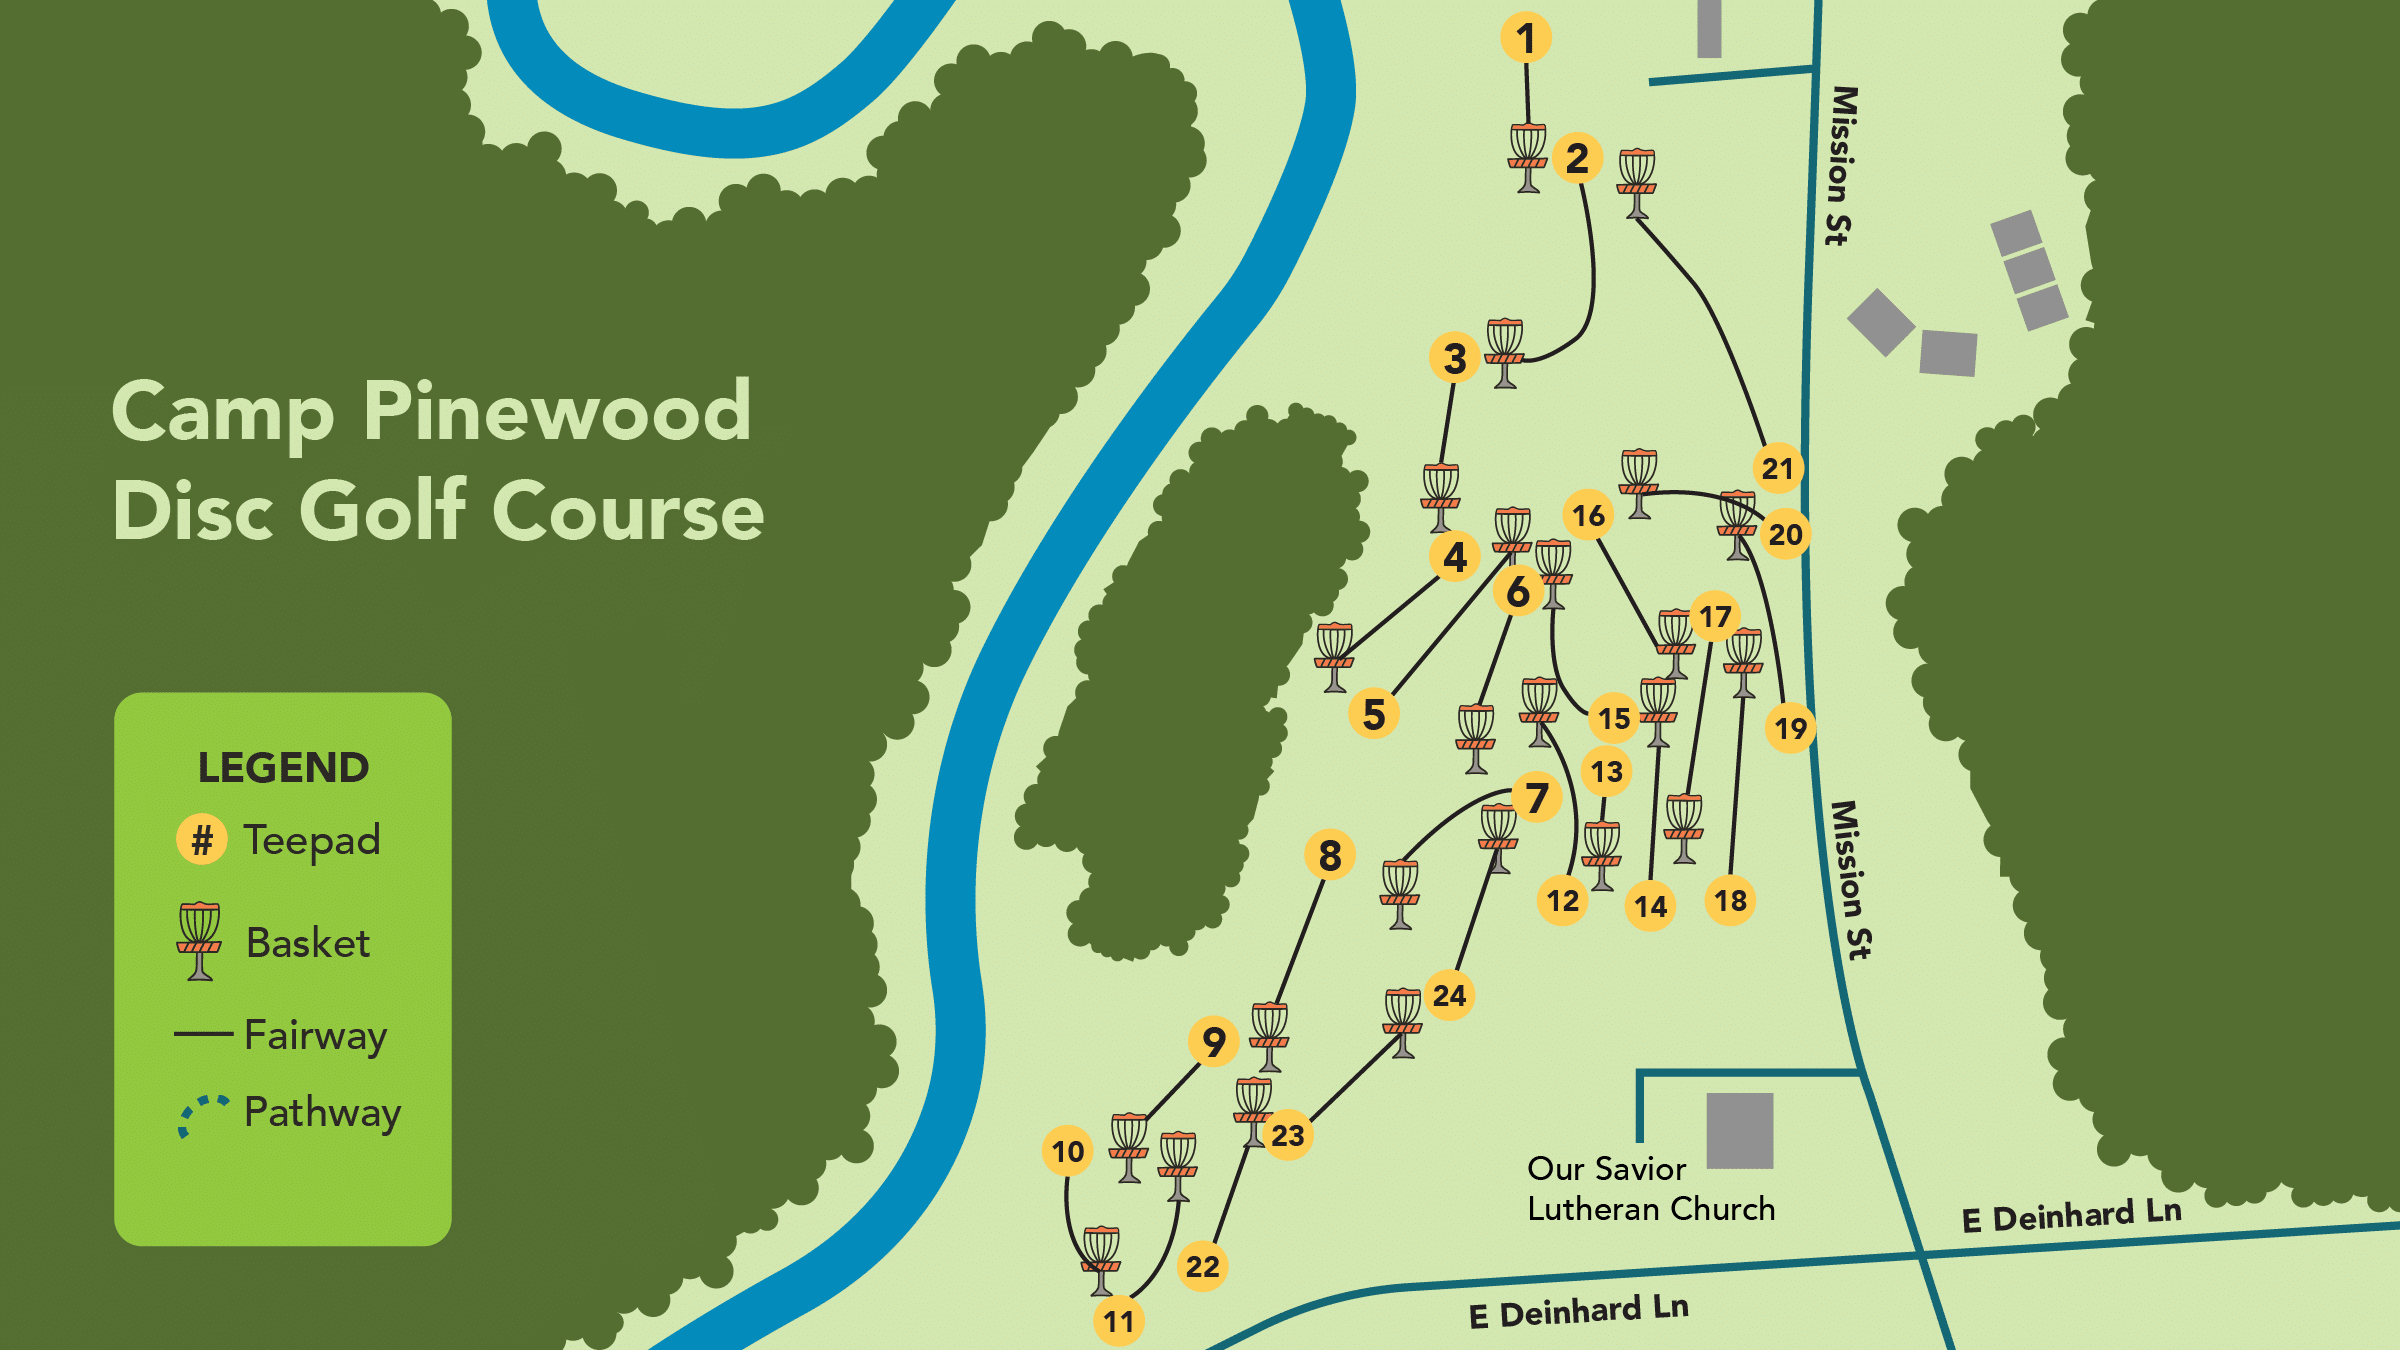 Camppinewood Disc Golf Course